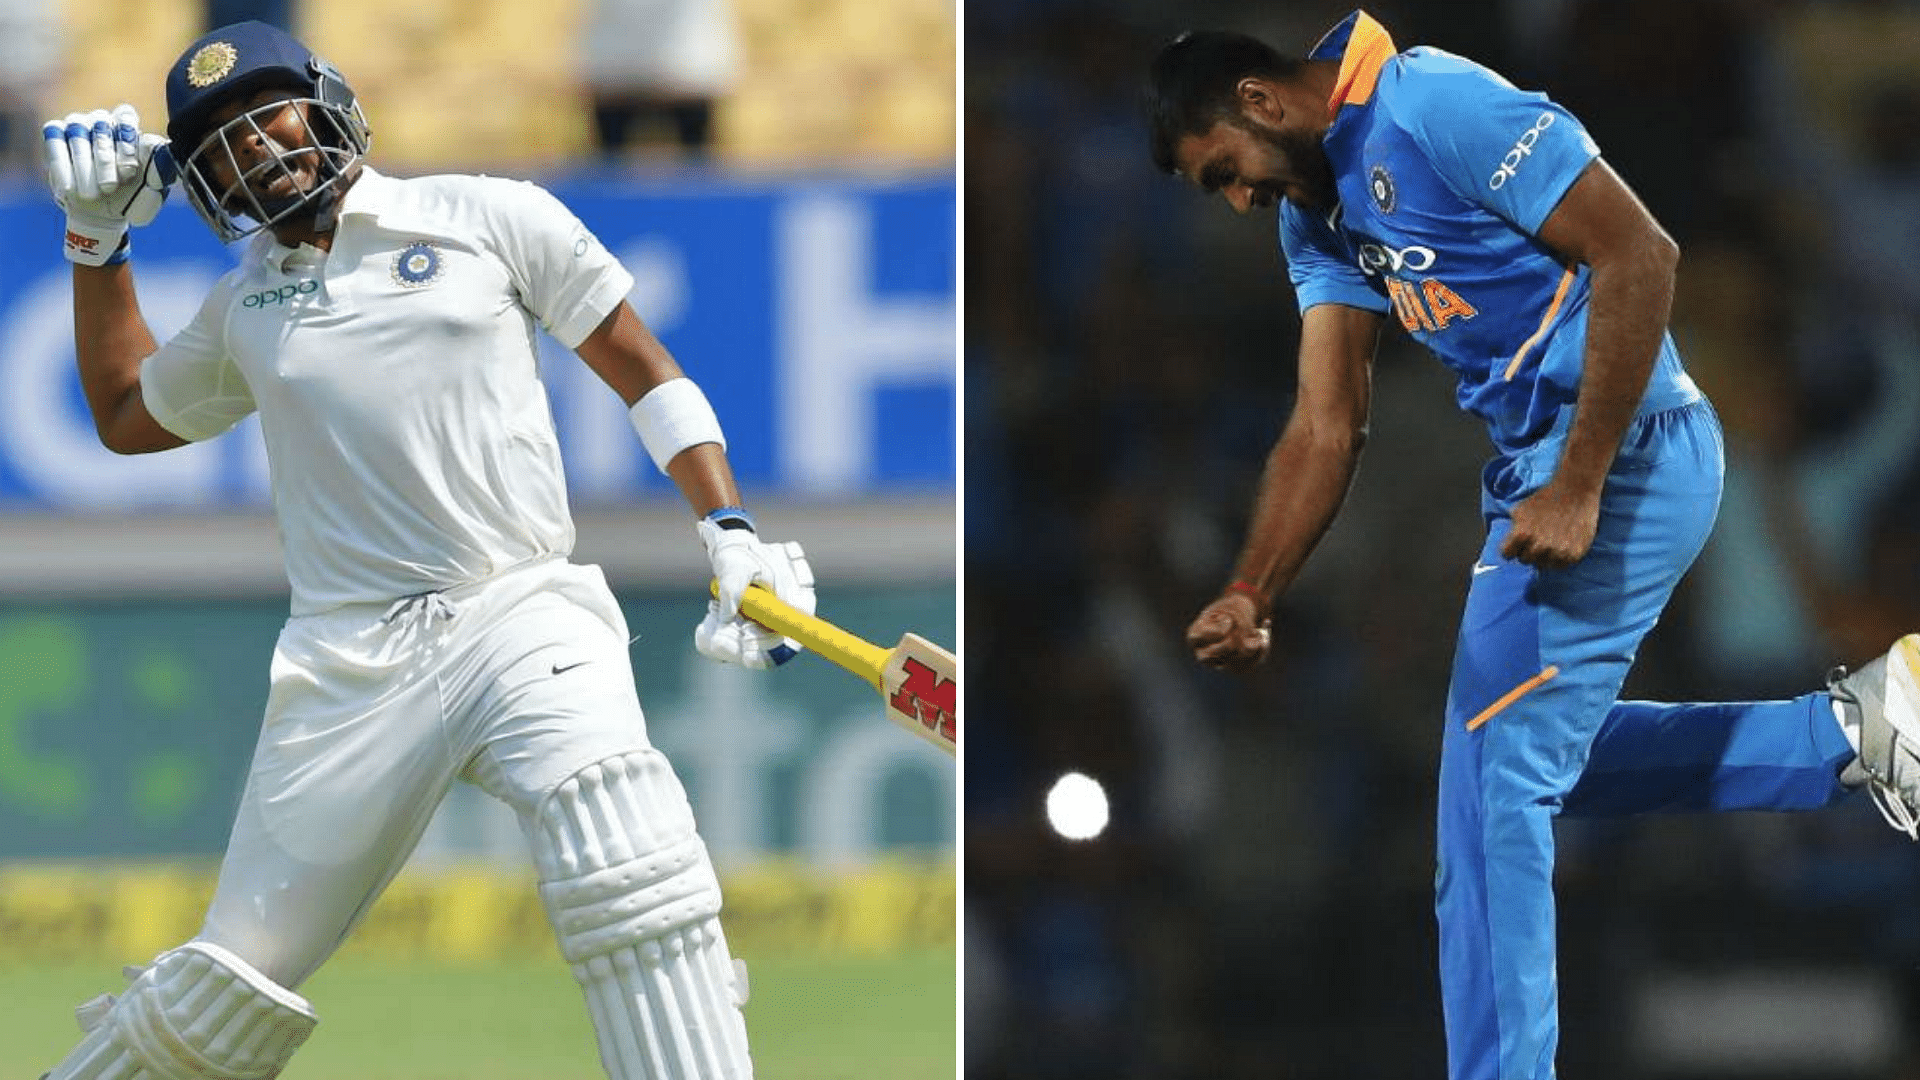 Prithvi Shaw (left) and Vijay Shankar were among the most notable absentees from the BCCI’s list of 25 contracted players for the Indian cricket team for 2018/19.